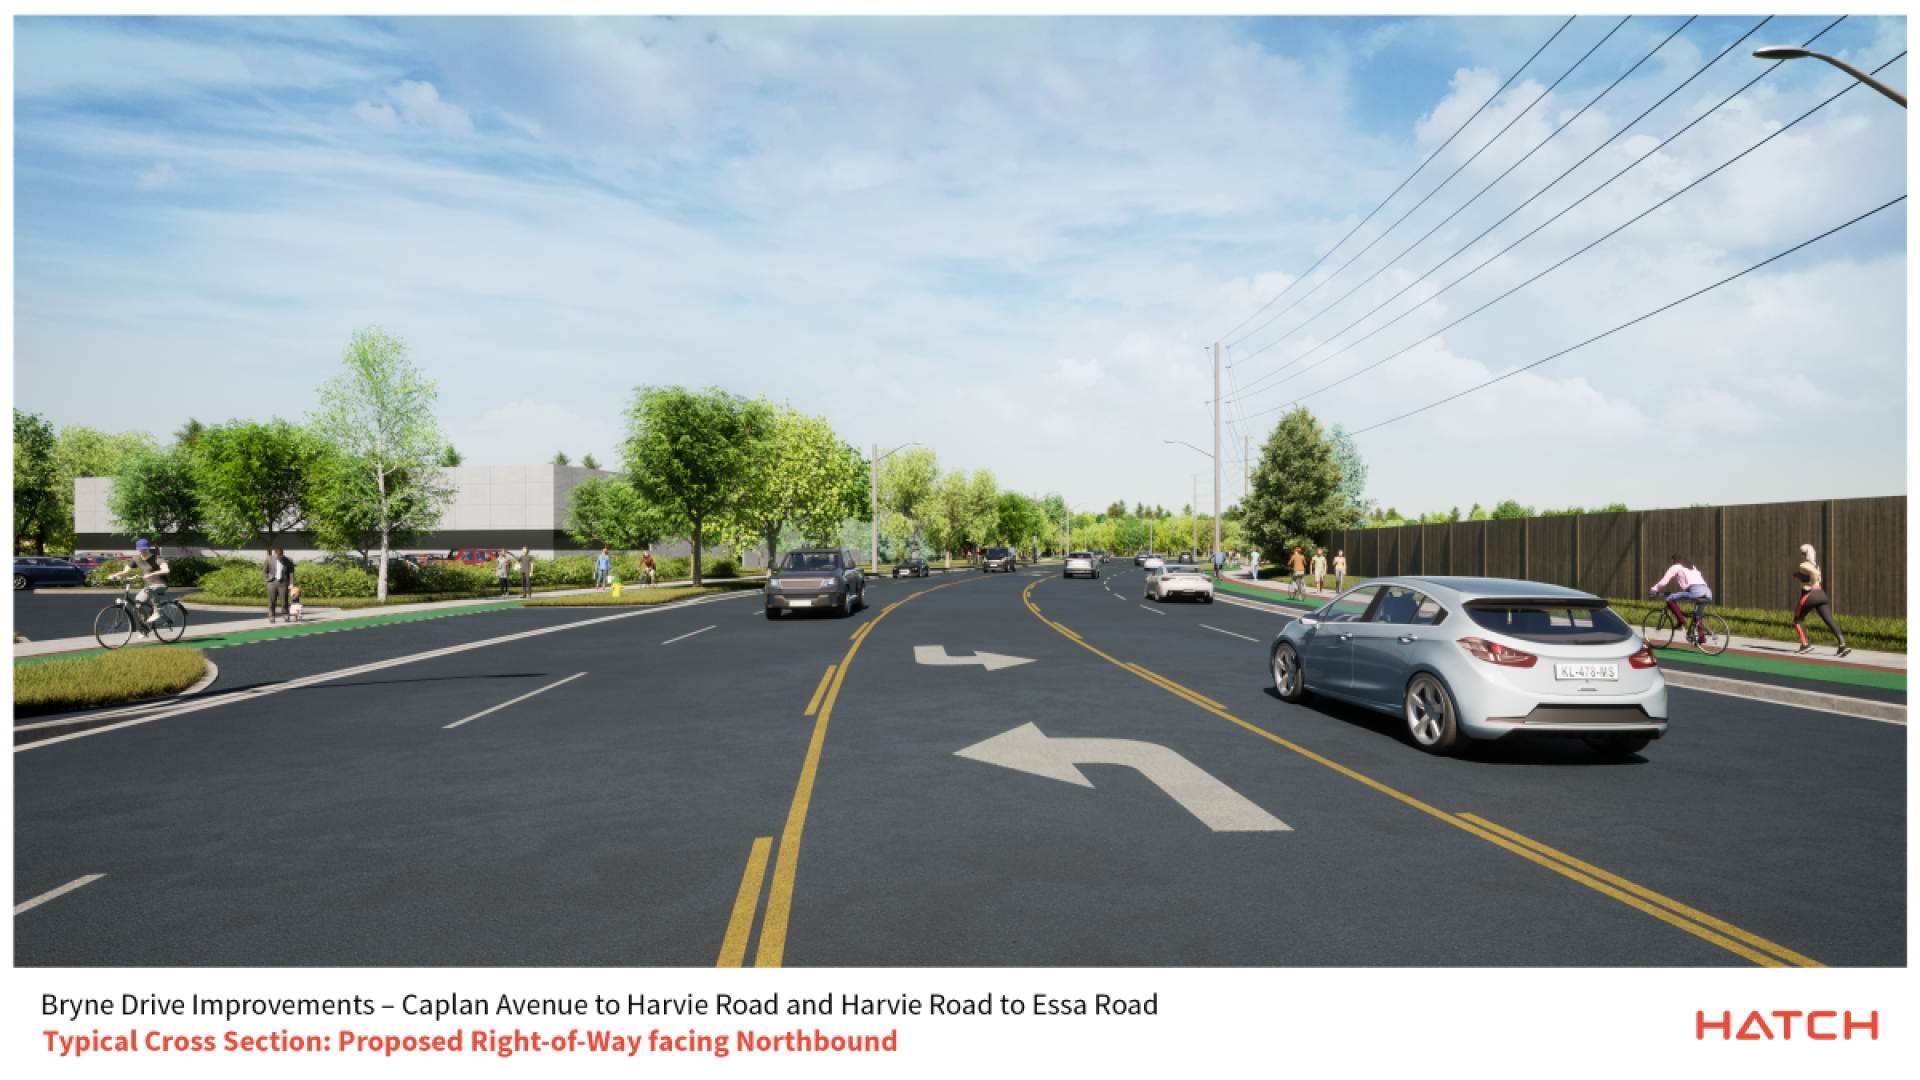 Rendering: Proposed Right-of-Way facing Northbound